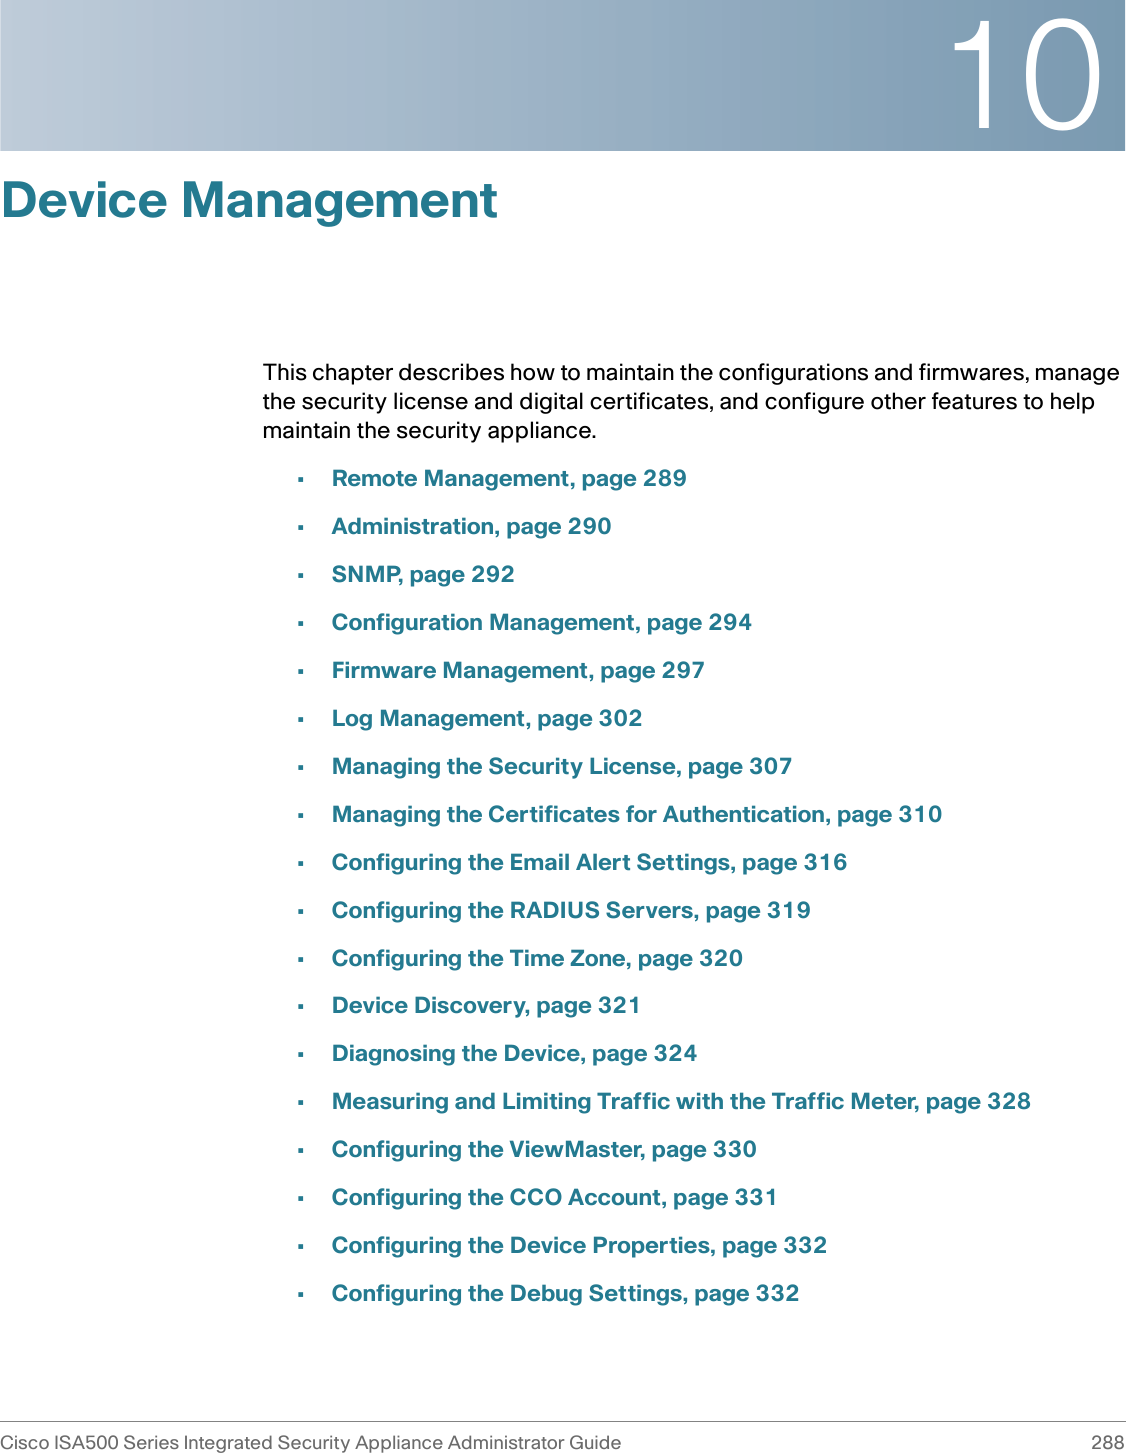 10Cisco ISA500 Series Integrated Security Appliance Administrator Guide 288 Device ManagementThis chapter describes how to maintain the configurations and firmwares, manage the security license and digital certificates, and configure other features to help maintain the security appliance. •Remote Management, page 289•Administration, page 290•SNMP, page 292•Configuration Management, page 294•Firmware Management, page 297•Log Management, page 302•Managing the Security License, page 307•Managing the Certificates for Authentication, page 310•Configuring the Email Alert Settings, page 316•Configuring the RADIUS Servers, page 319•Configuring the Time Zone, page 320•Device Discovery, page 321•Diagnosing the Device, page 324•Measuring and Limiting Traffic with the Traffic Meter, page 328•Configuring the ViewMaster, page 330•Configuring the CCO Account, page 331•Configuring the Device Properties, page 332•Configuring the Debug Settings, page 332